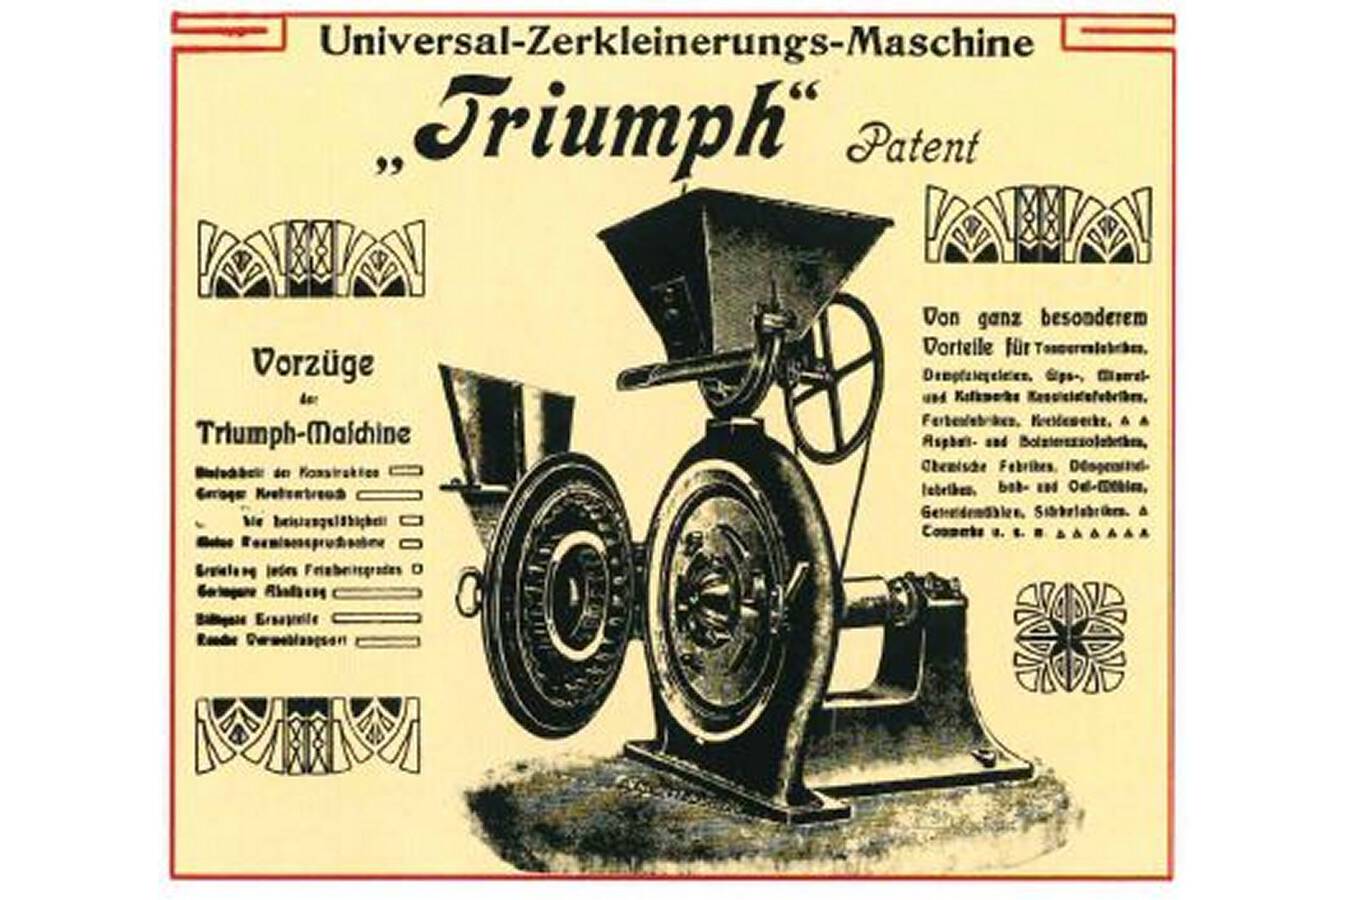 The first verifiable patent from company founder Otto Holzhäuer in 1903 was for the “Triumph” universal shredder.